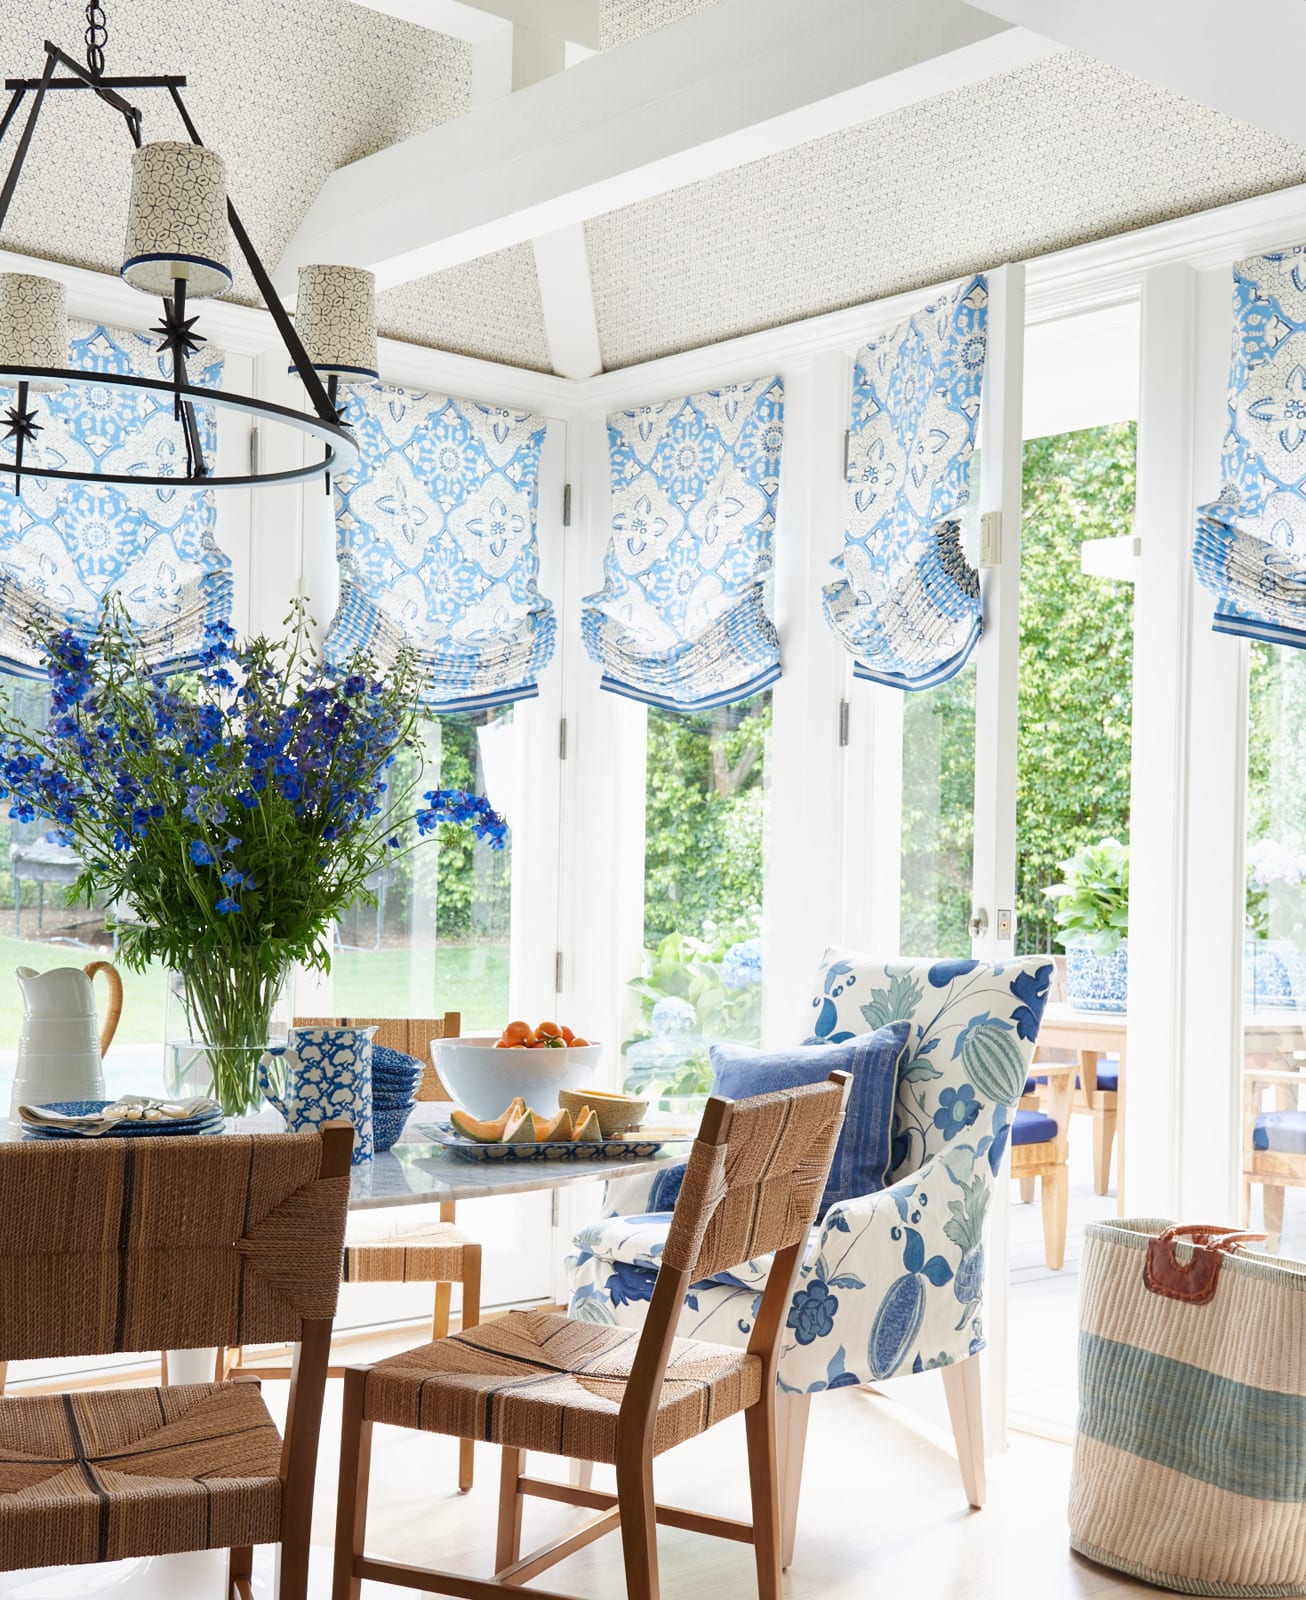 10 Favorites in Blue & White with the fabulous Mark D. Sikes - Amy Neunsinger Photography - dining room - dining room design - dining room decor - wood beams